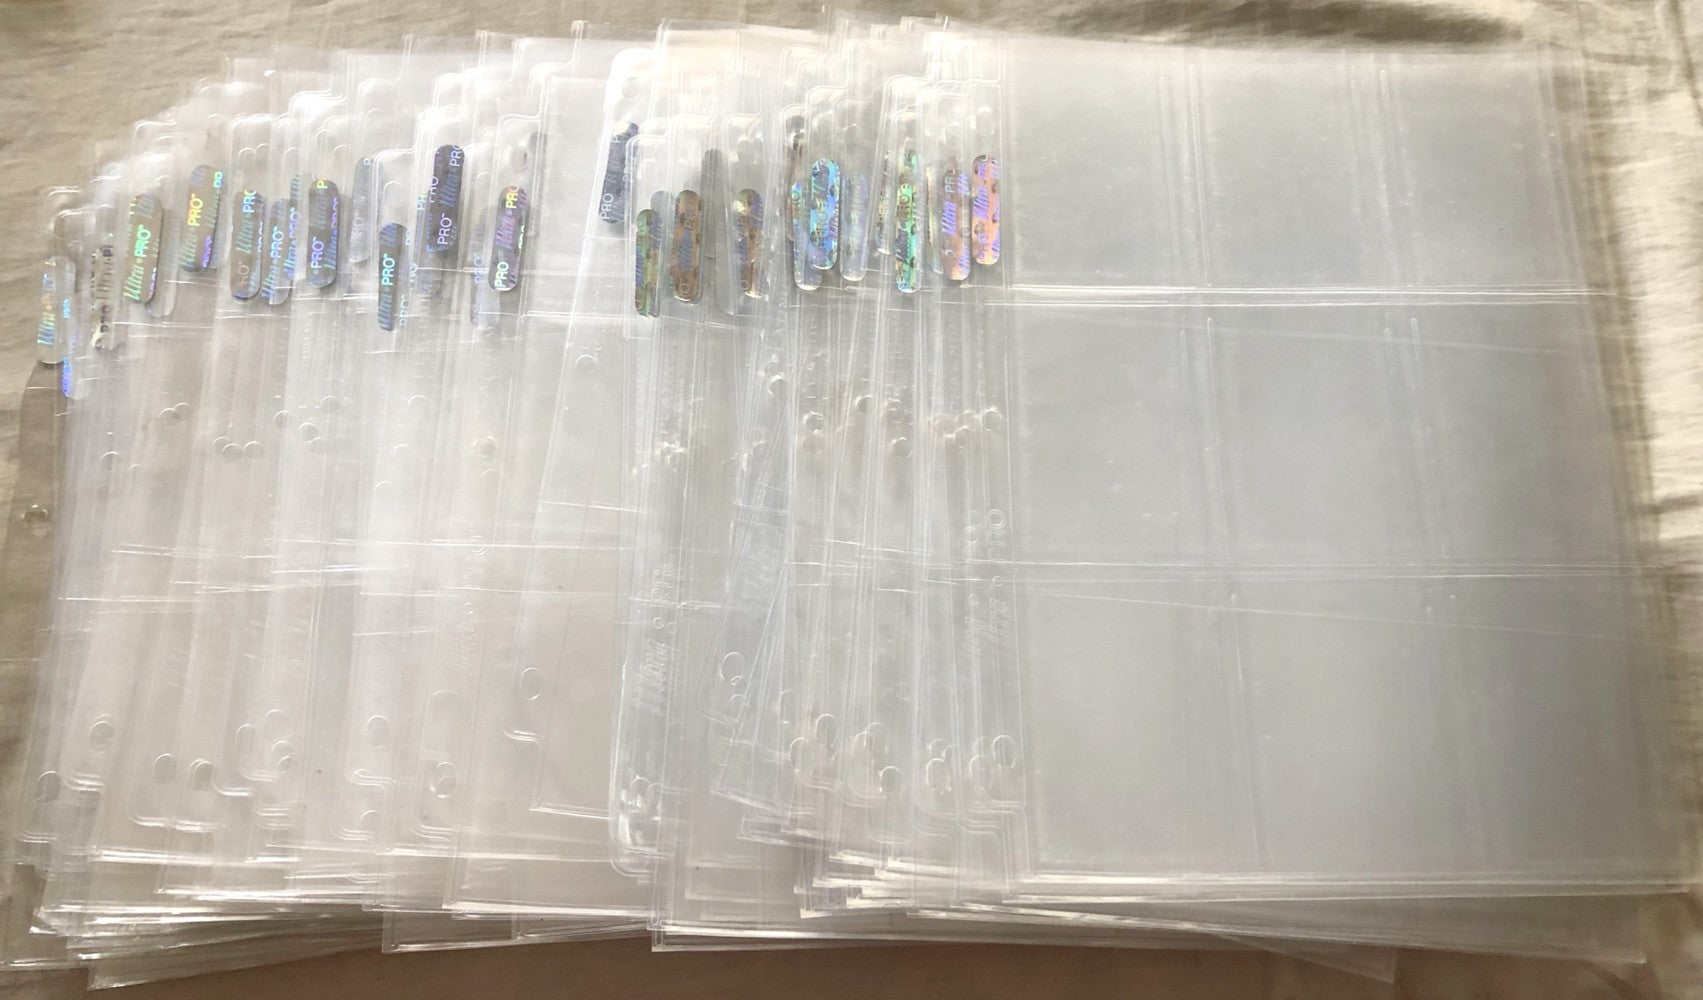 Lot of 16 Ultra Pro Platinum 9 pocket trading card storage sheets (gently used)